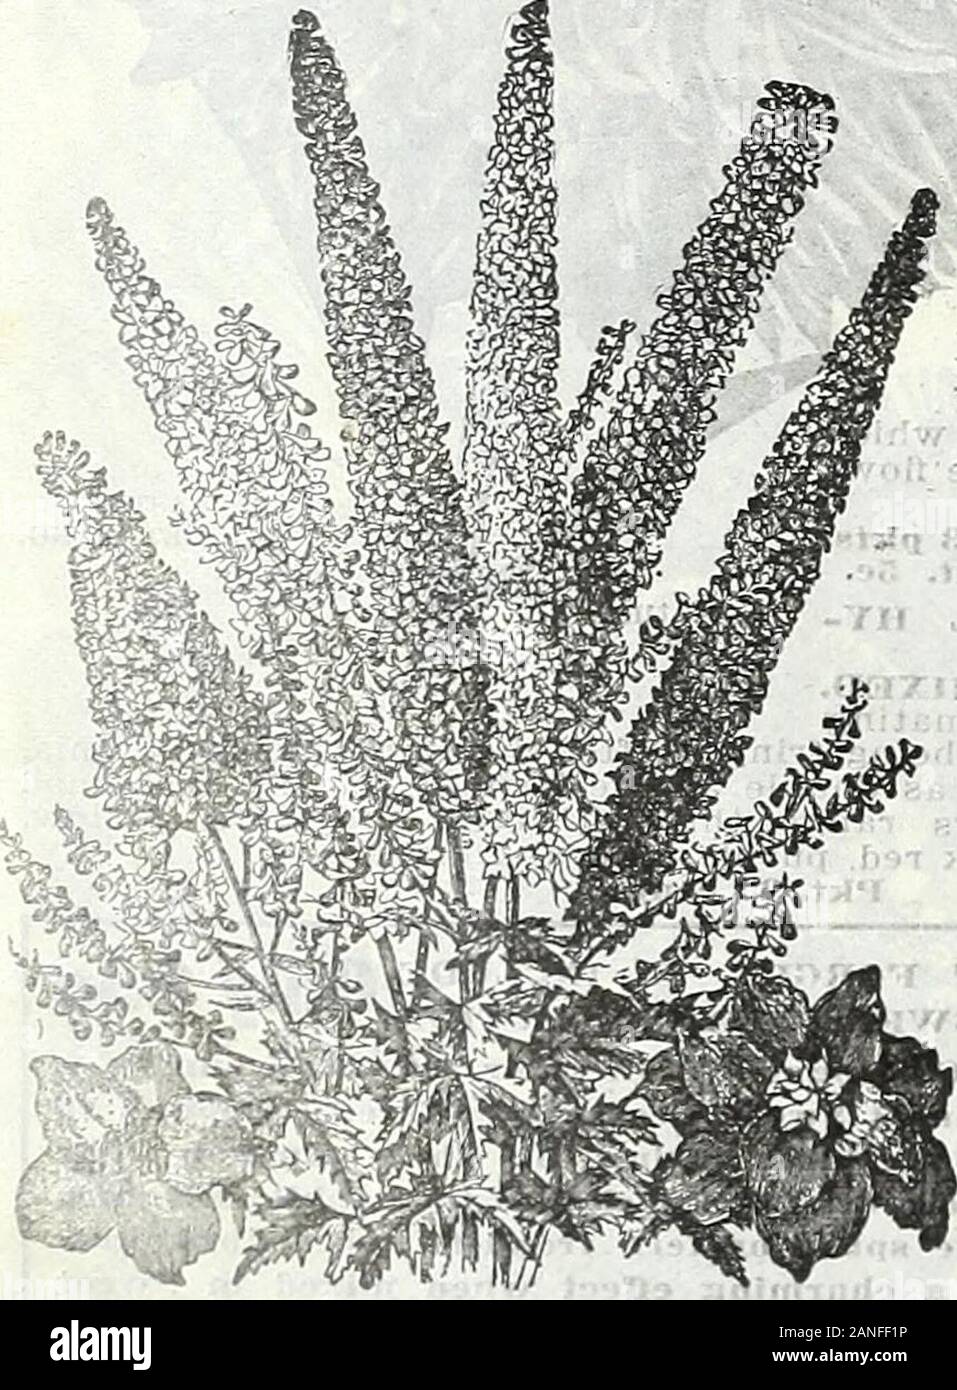 Farm and garden annual, spring 1906 . SCABIOSA JAPONICA. NICOTIANA HYBRIDS OF SANDERAE. SCABIOSA JAPONICA. A hardy perennial Scabious or Mourn-ing Bride, from Japan, forming largemany-branched bushes of about 2% feetin height. The flowers are borne on long,wiry stems 15 to 20 inches in length andmany of them measuring 22 inchesacross of a beautiful lavender blue color.The plants are extremely free flowering,producing lovely flowers from June untillate in fall. Excellent for cut flowerwork. Will not be at its best until thesecond year.. HARDY LARKSPUR.Delphinium Grandifloruni Mixed. In our sup Stock Photo